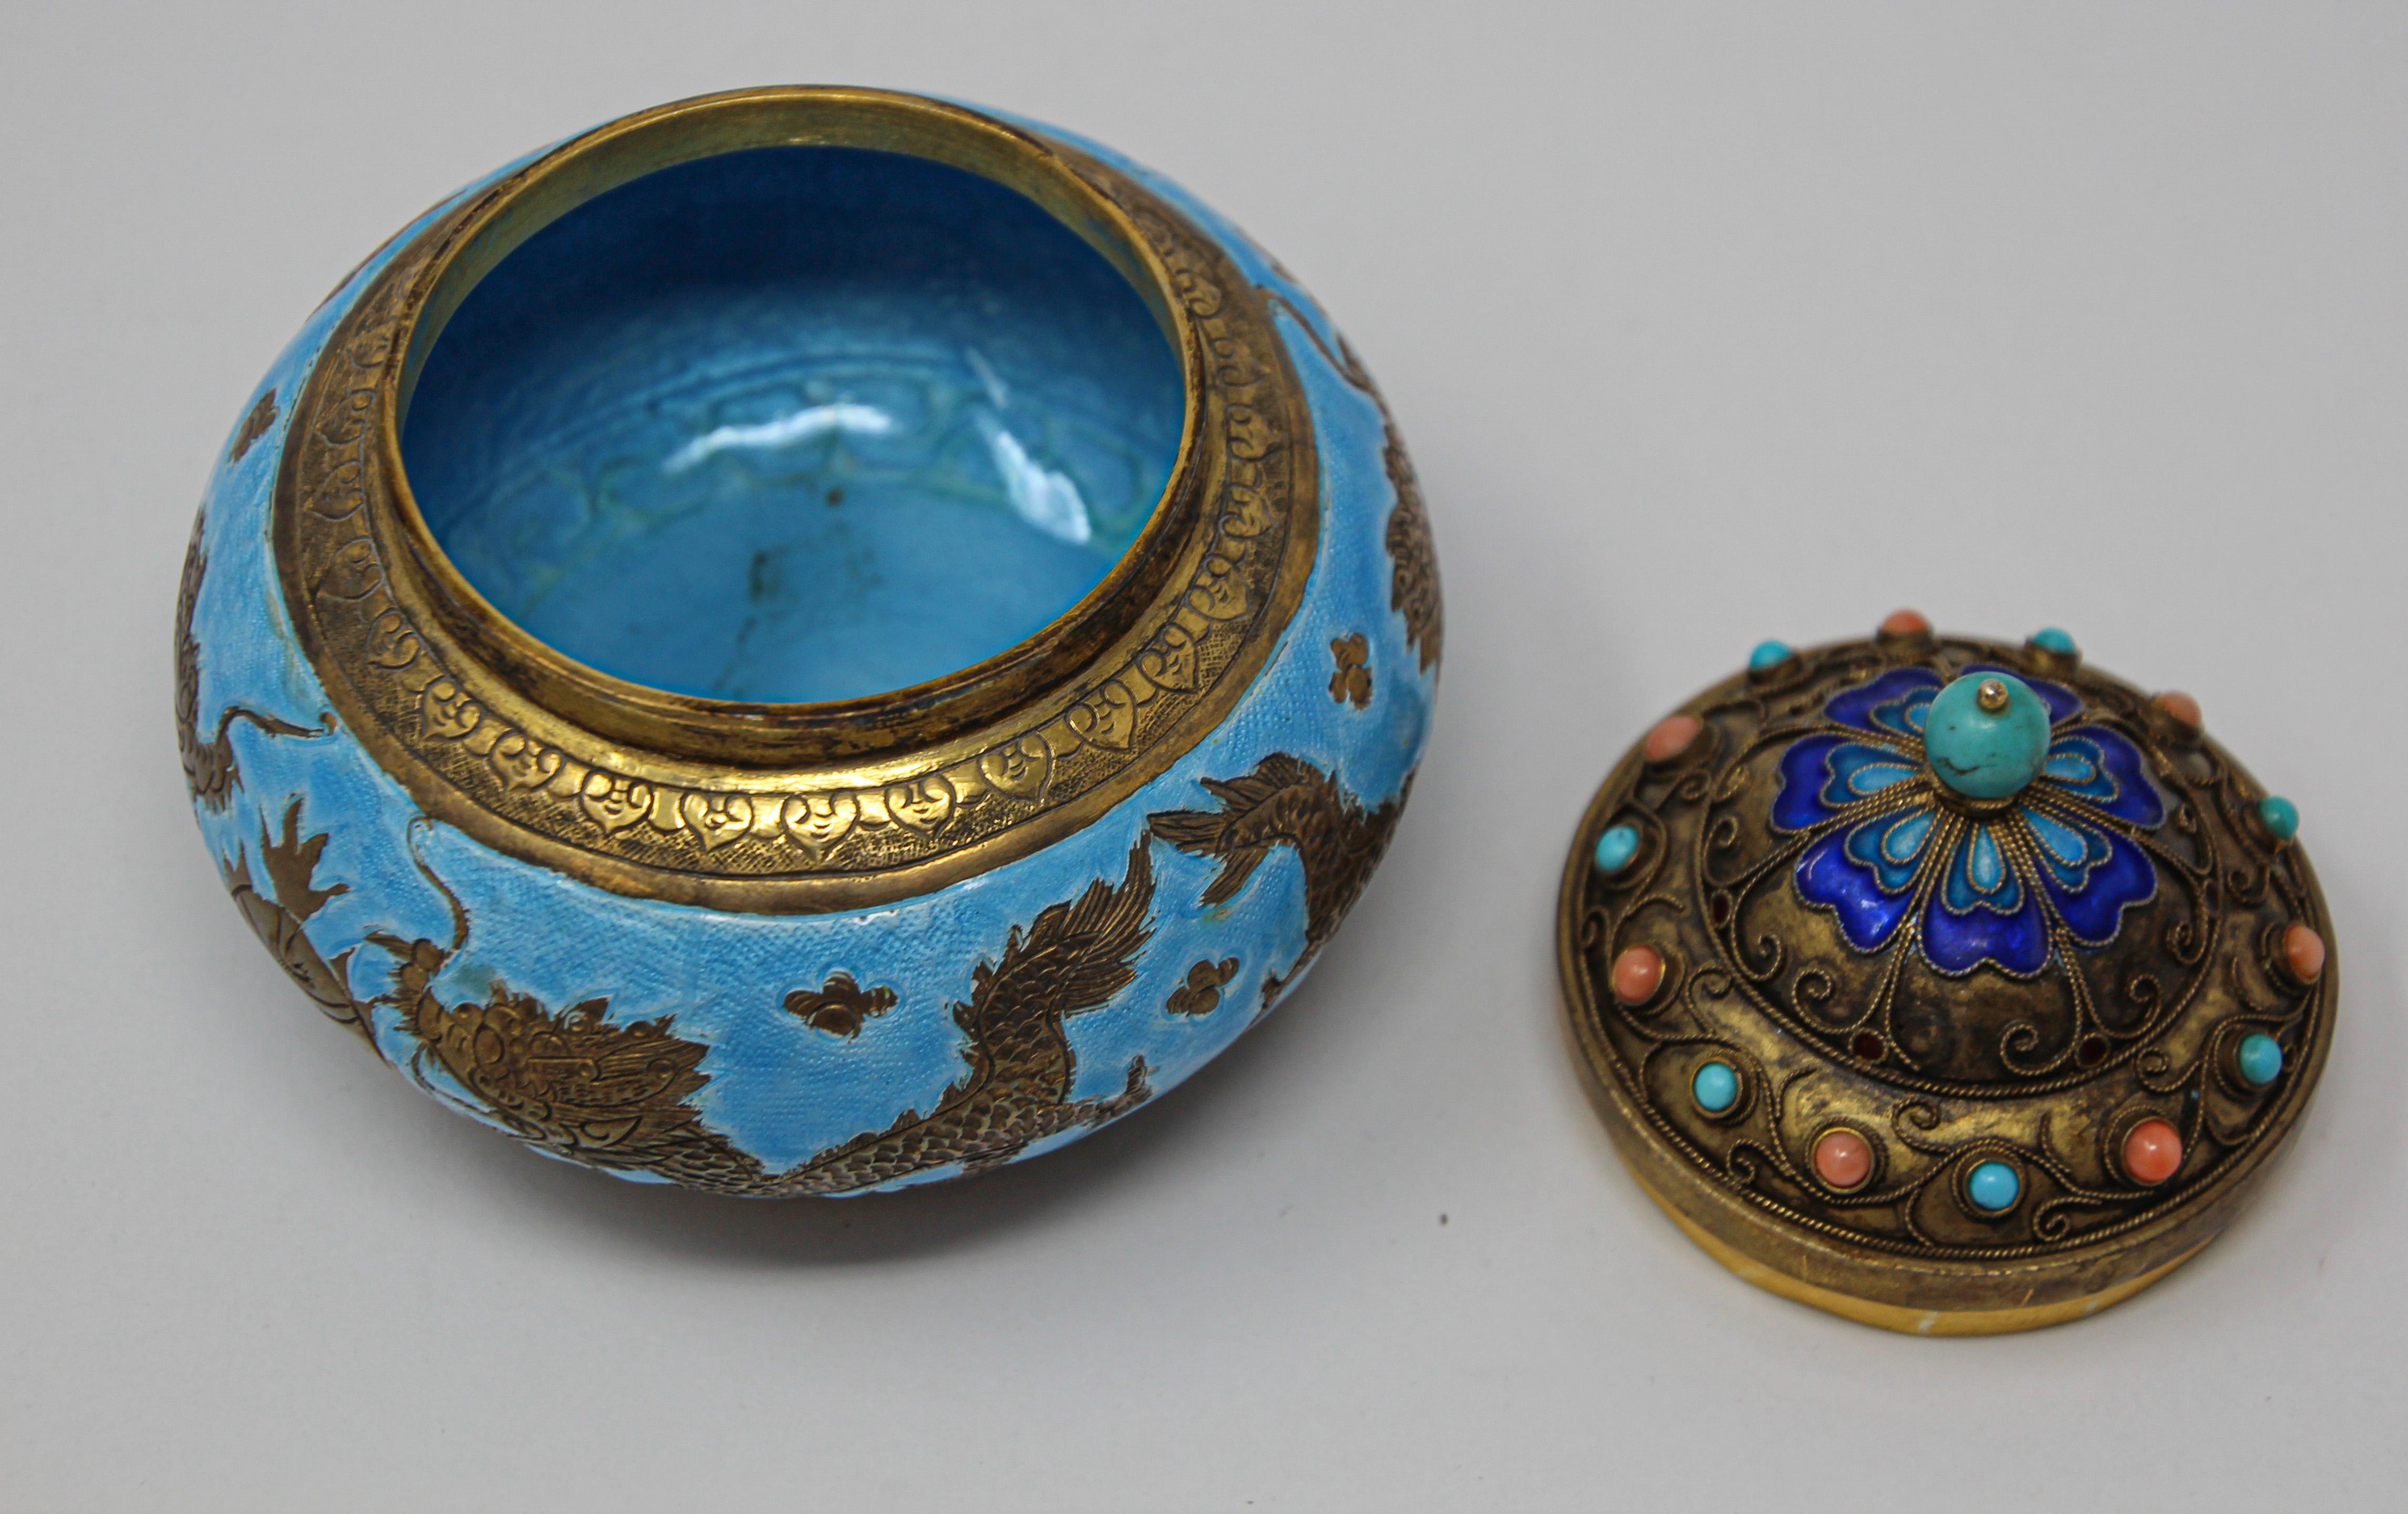 Chinese Export Brass Snuff Box with Turquoise Enamel Dragons and Beads Inlaid 8